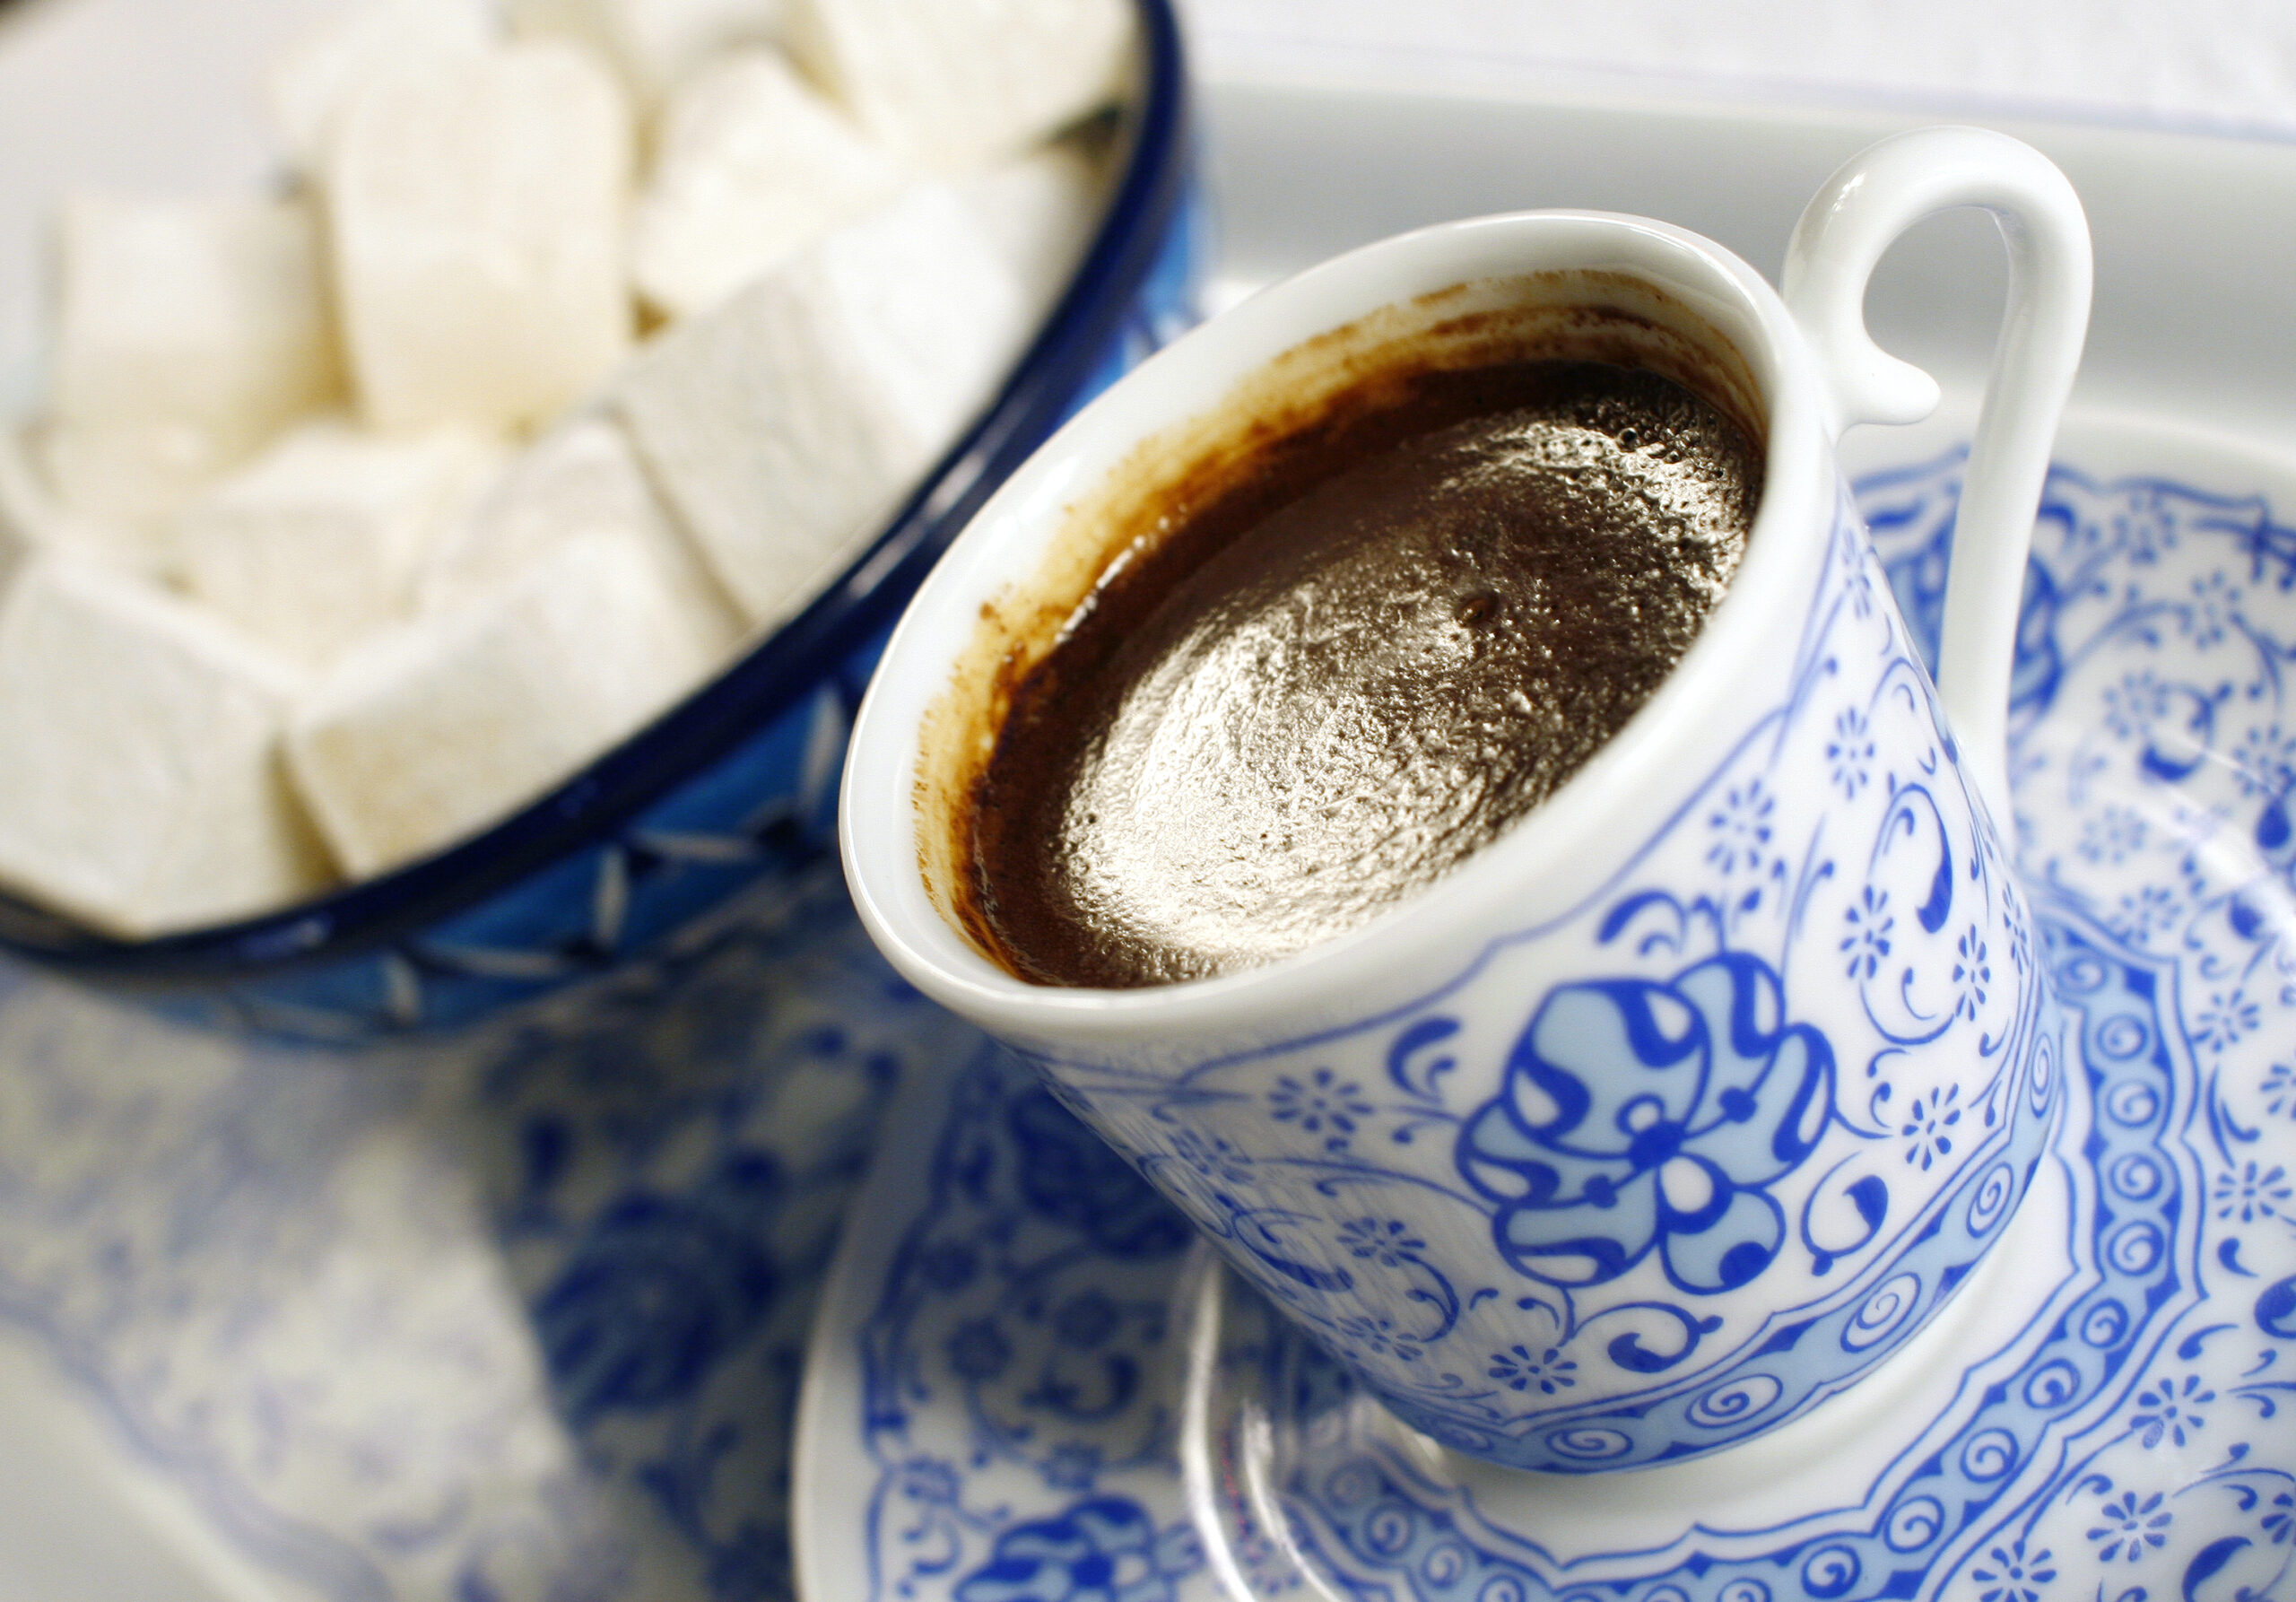 Turkish coffee exciting facts and tips for the preparation scaled - Turkish coffee - exciting facts and tips for the preparation!